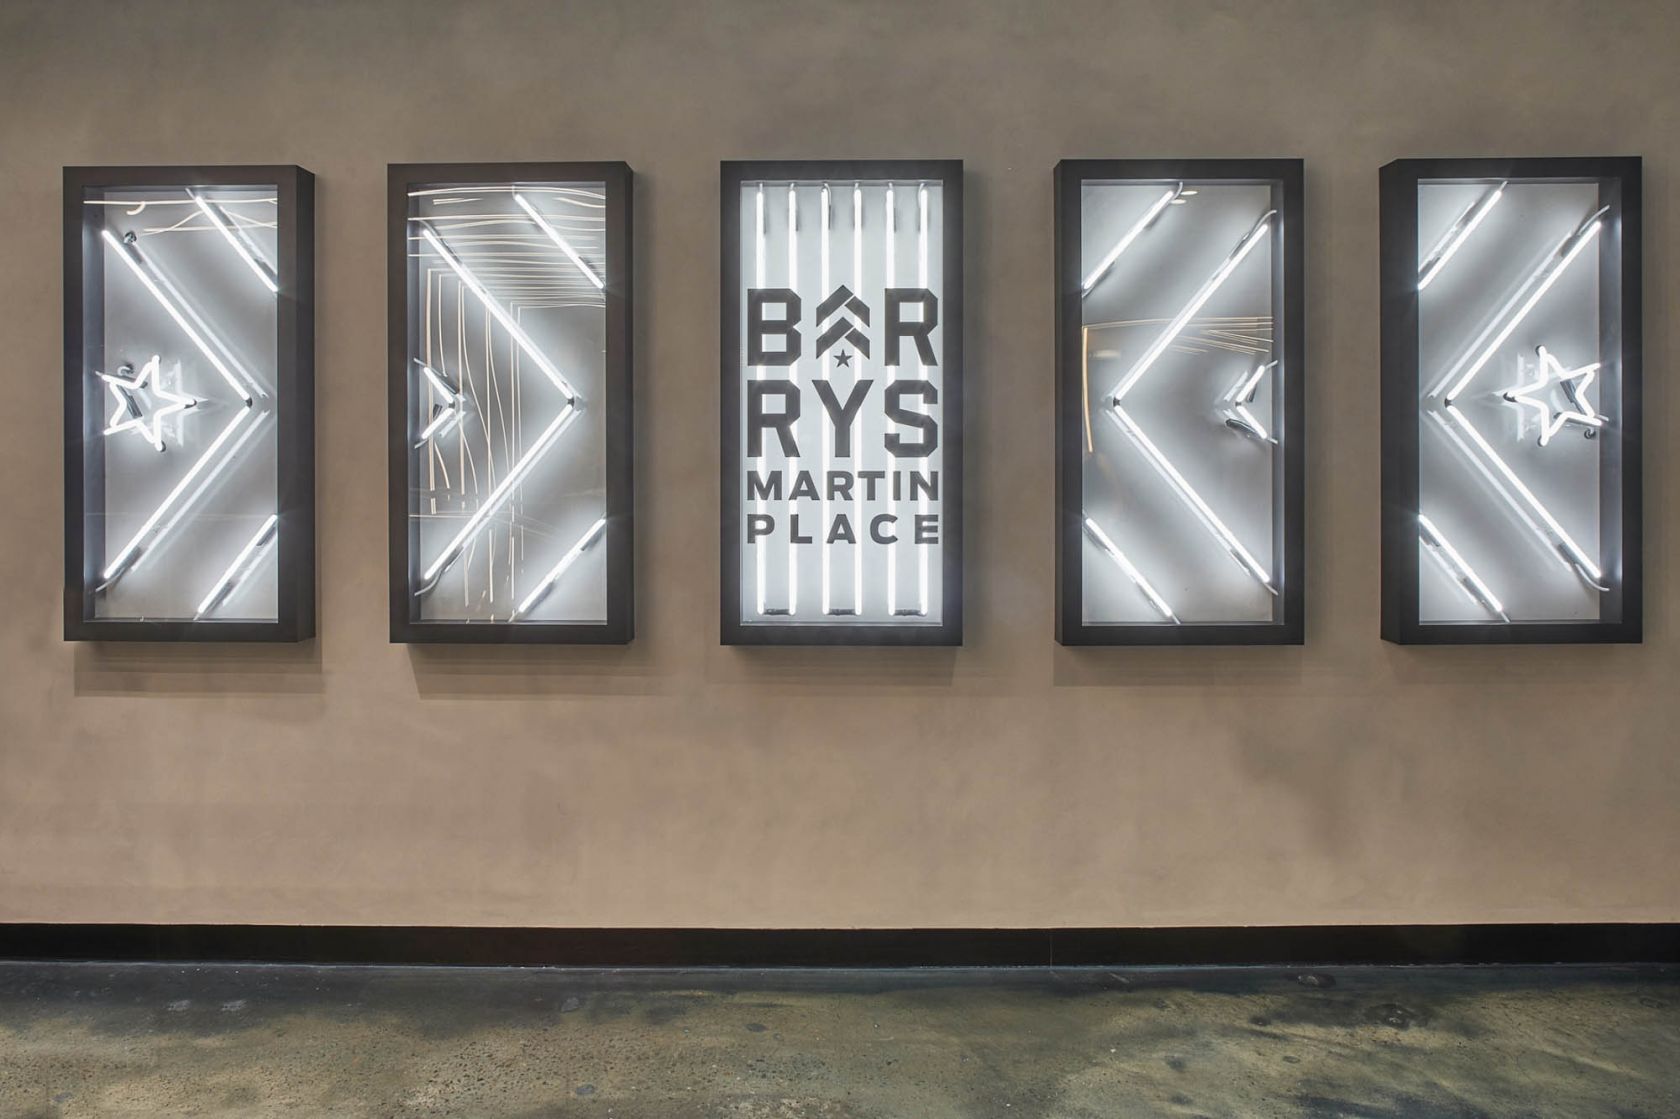 Barry's Bootcamp - Martin Place